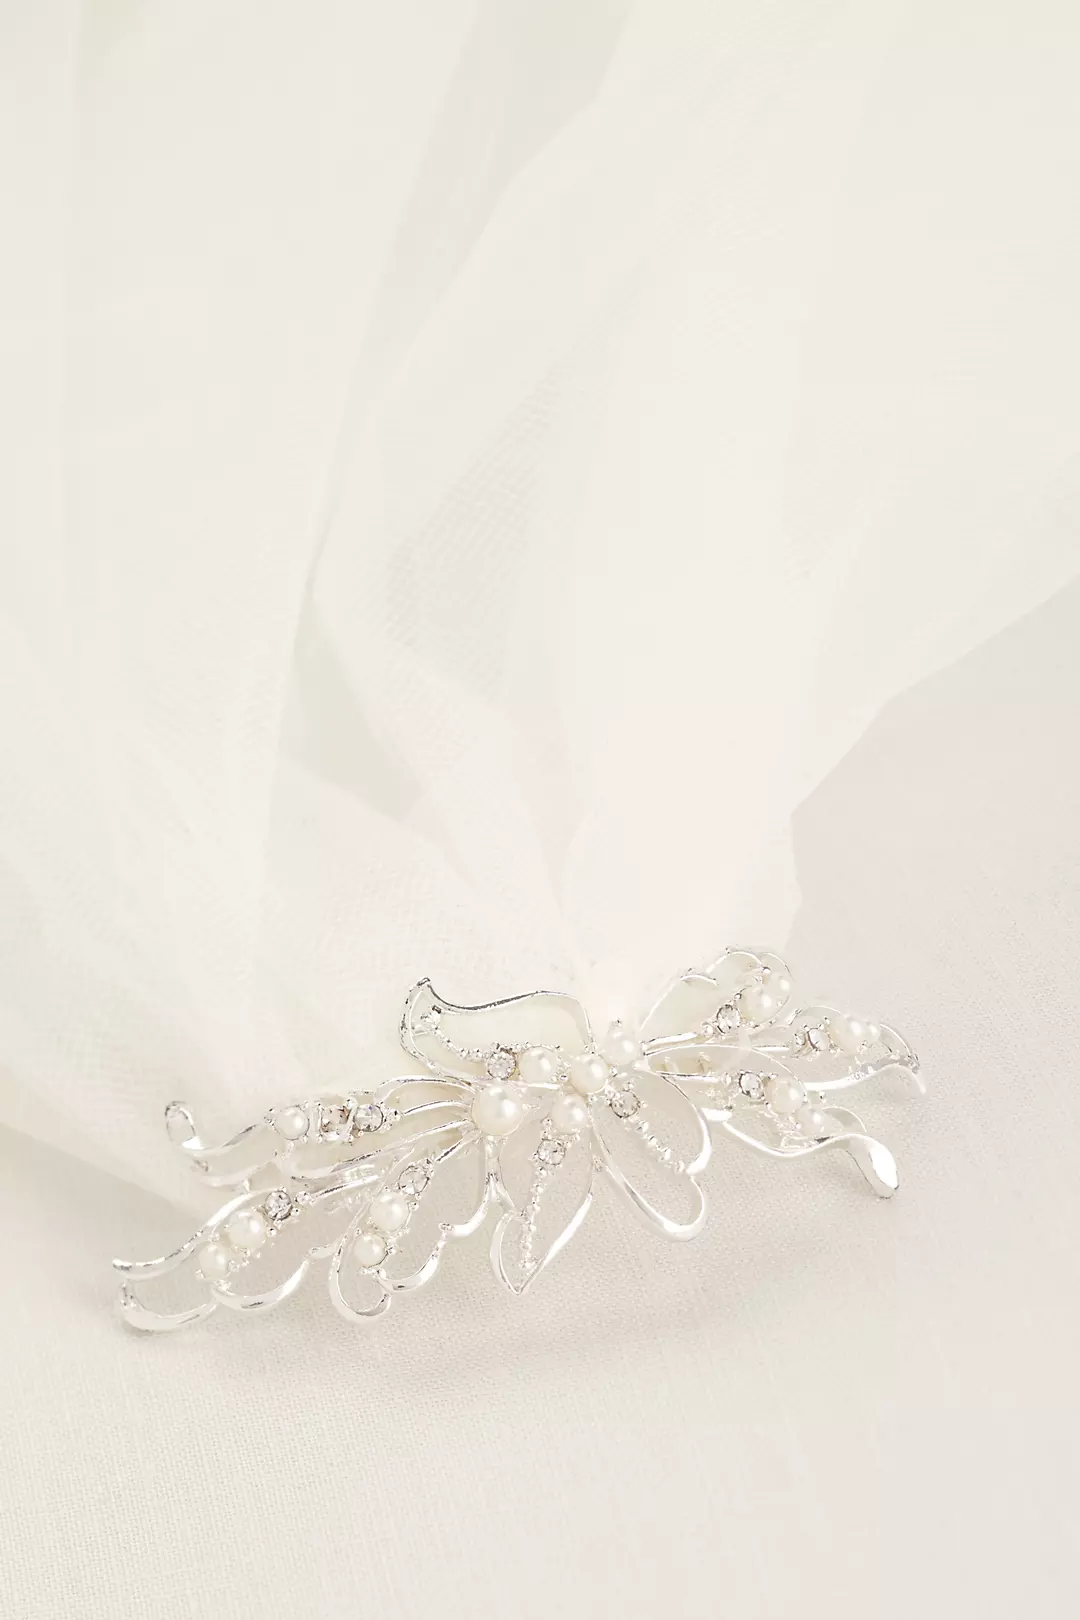 Short Veil with Pearl Wire Flower Comb Image